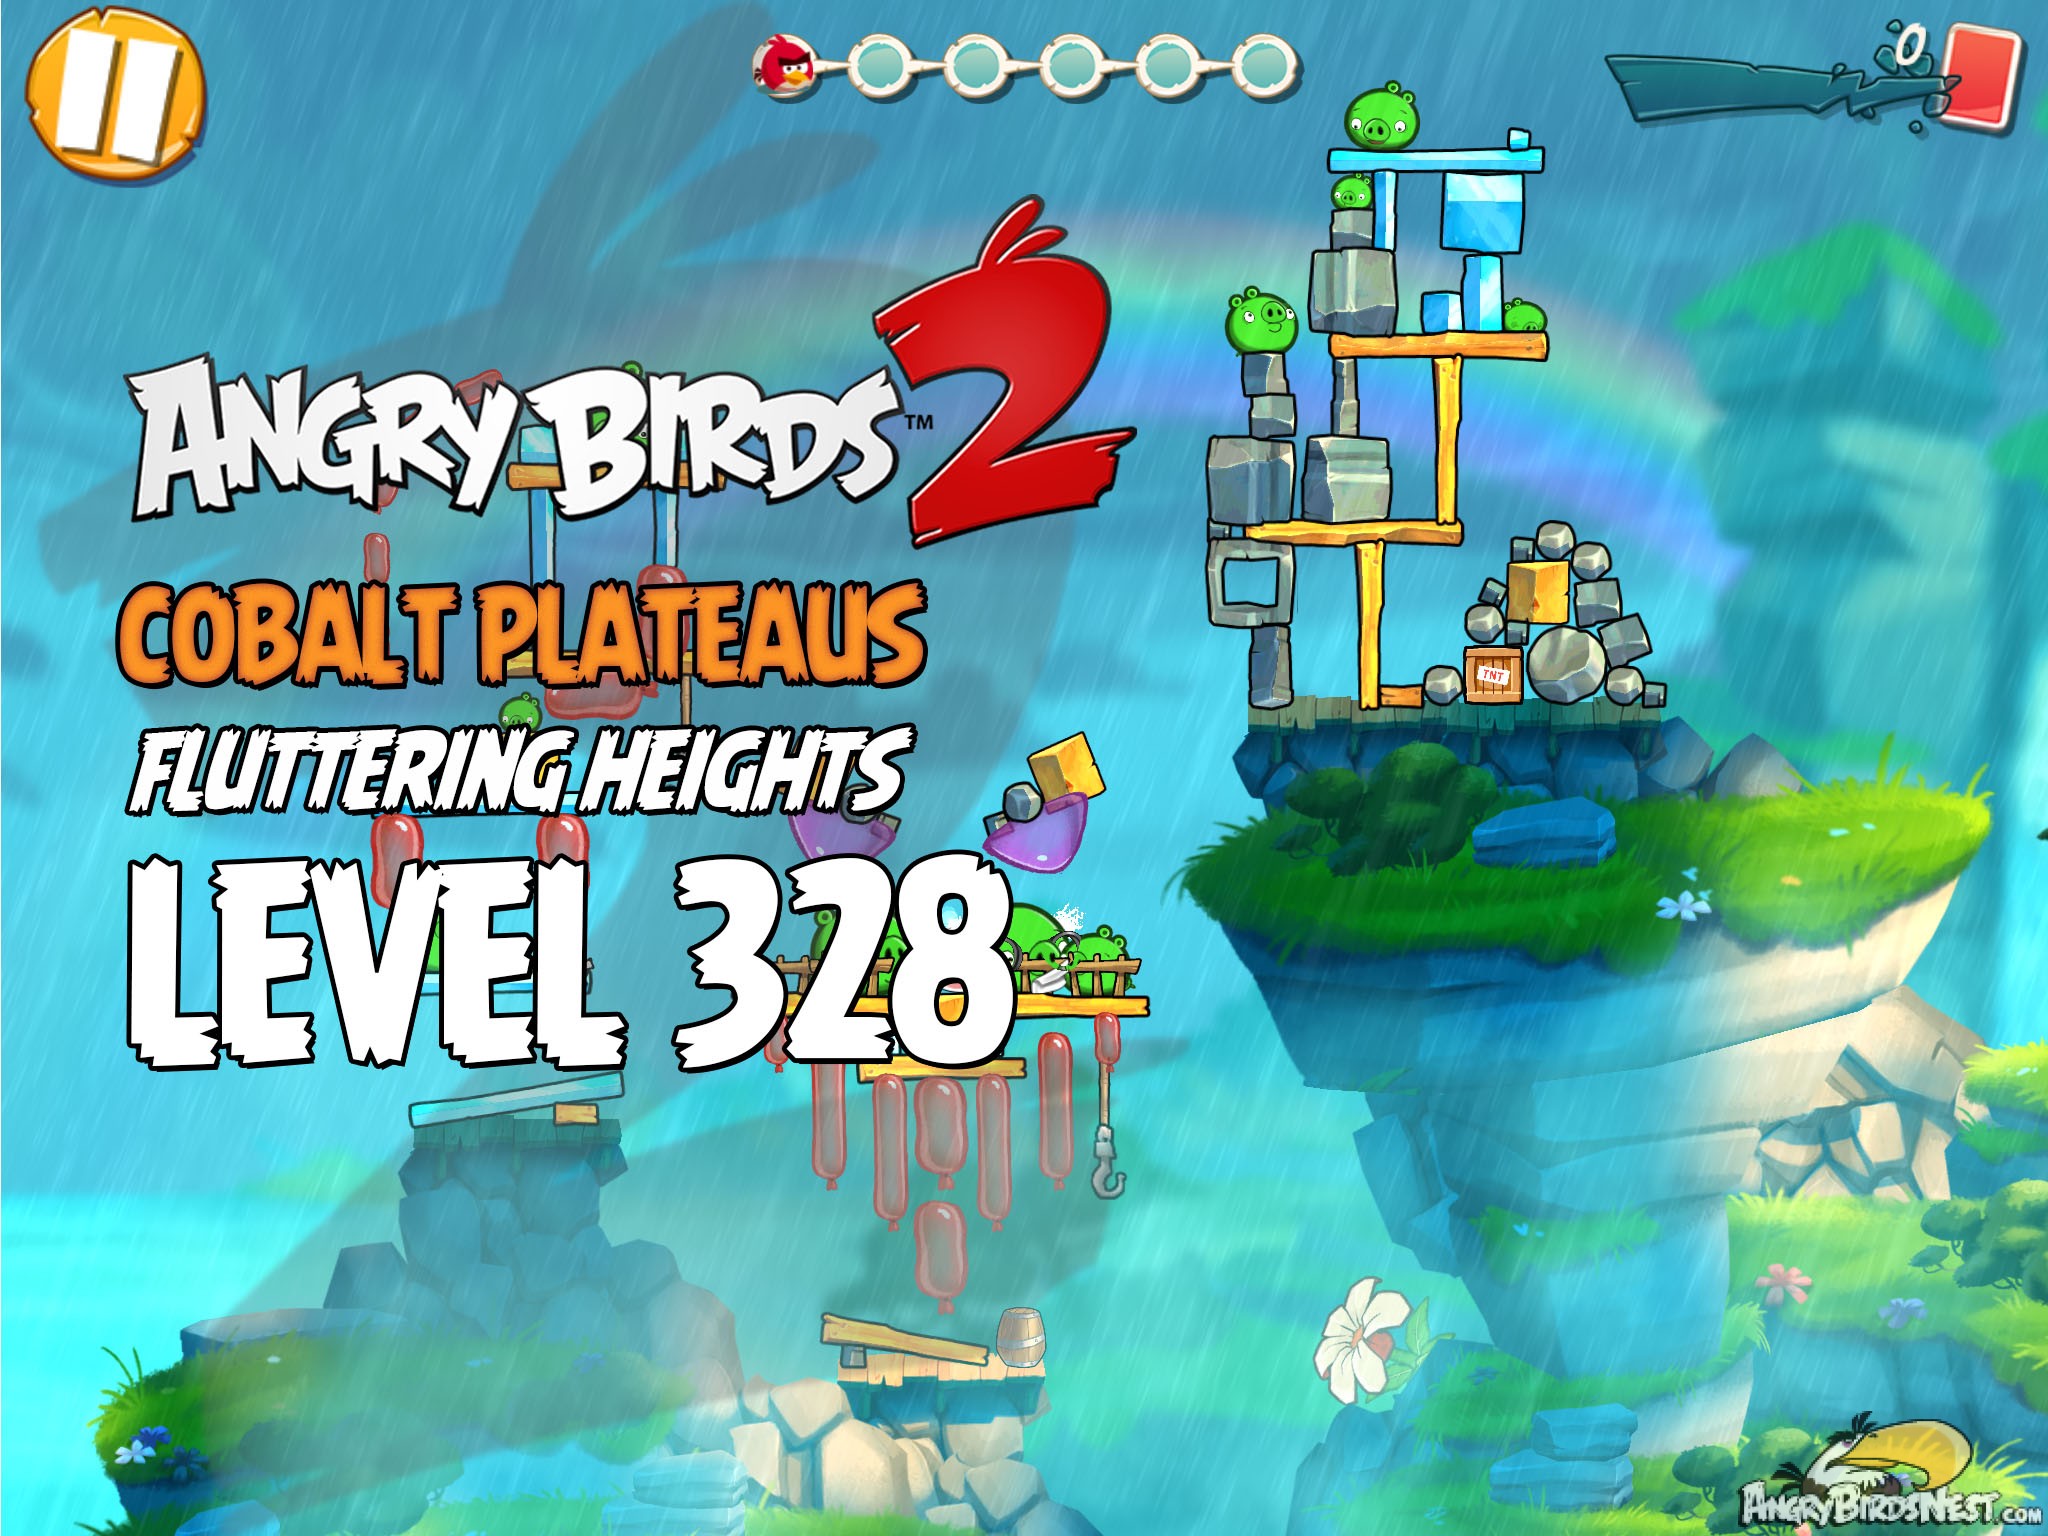 Angry Birds 2 Level 328 Cobalt Plateaus Fluttering Heights Image